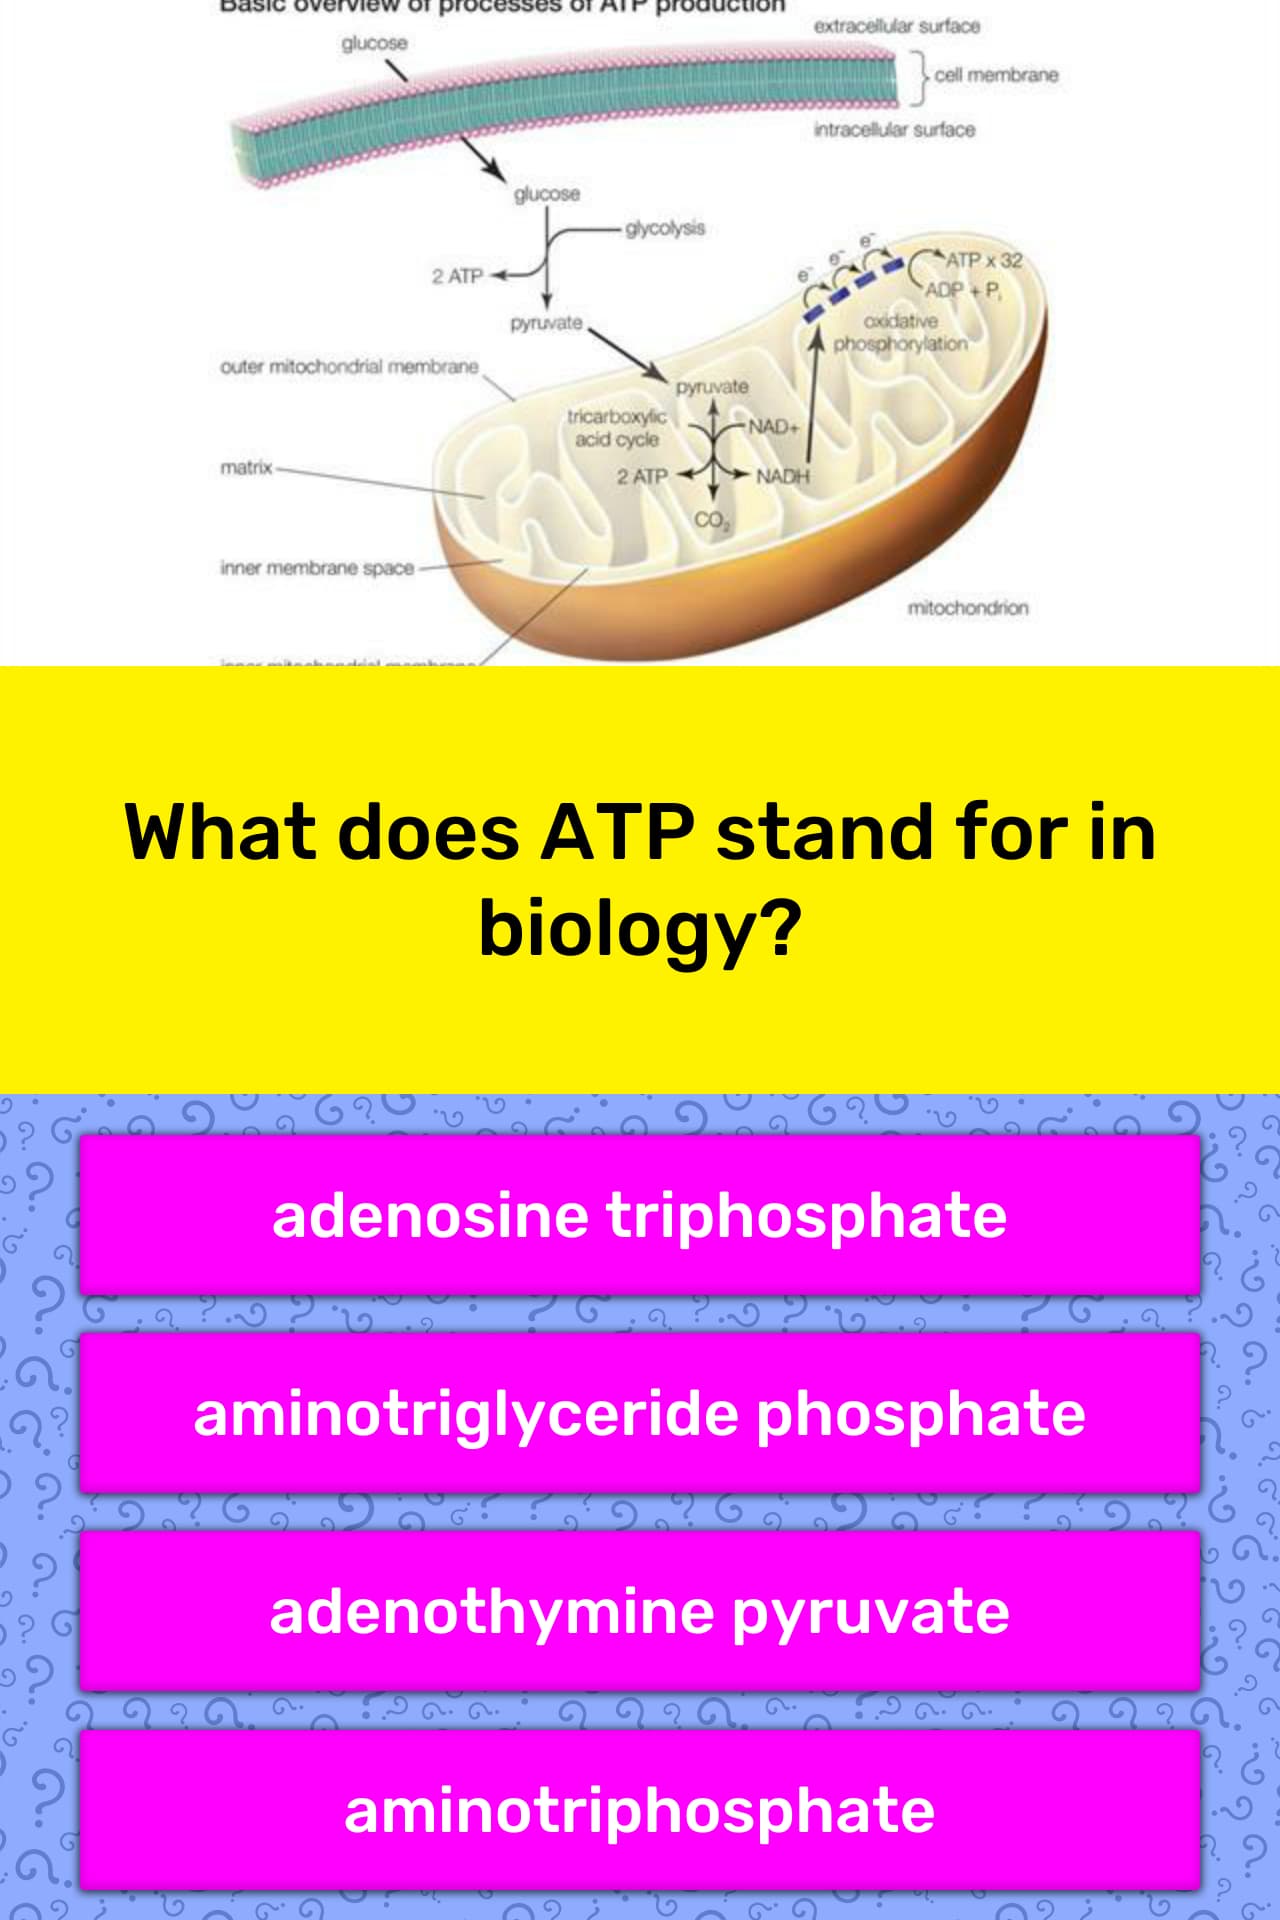 What does ATP stand for in biology?